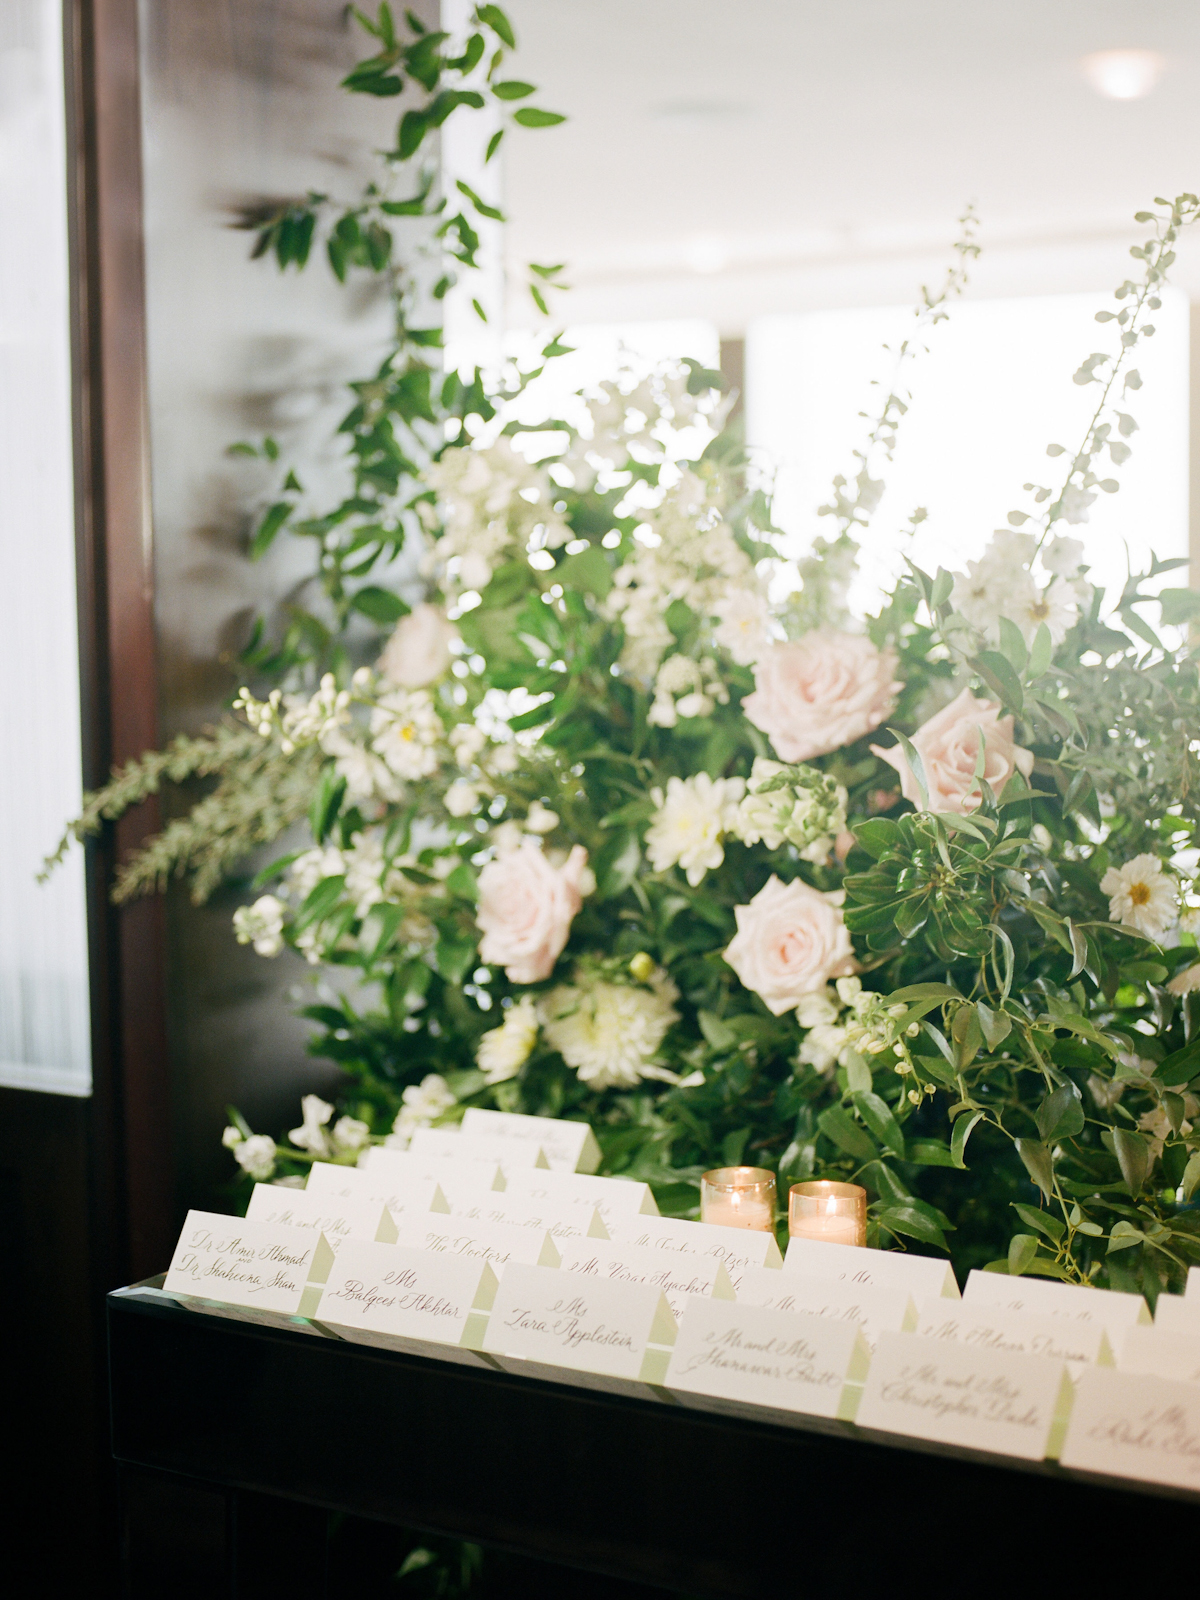 Escort card table flowers and calligraphed cards at Rainbow Room wedding